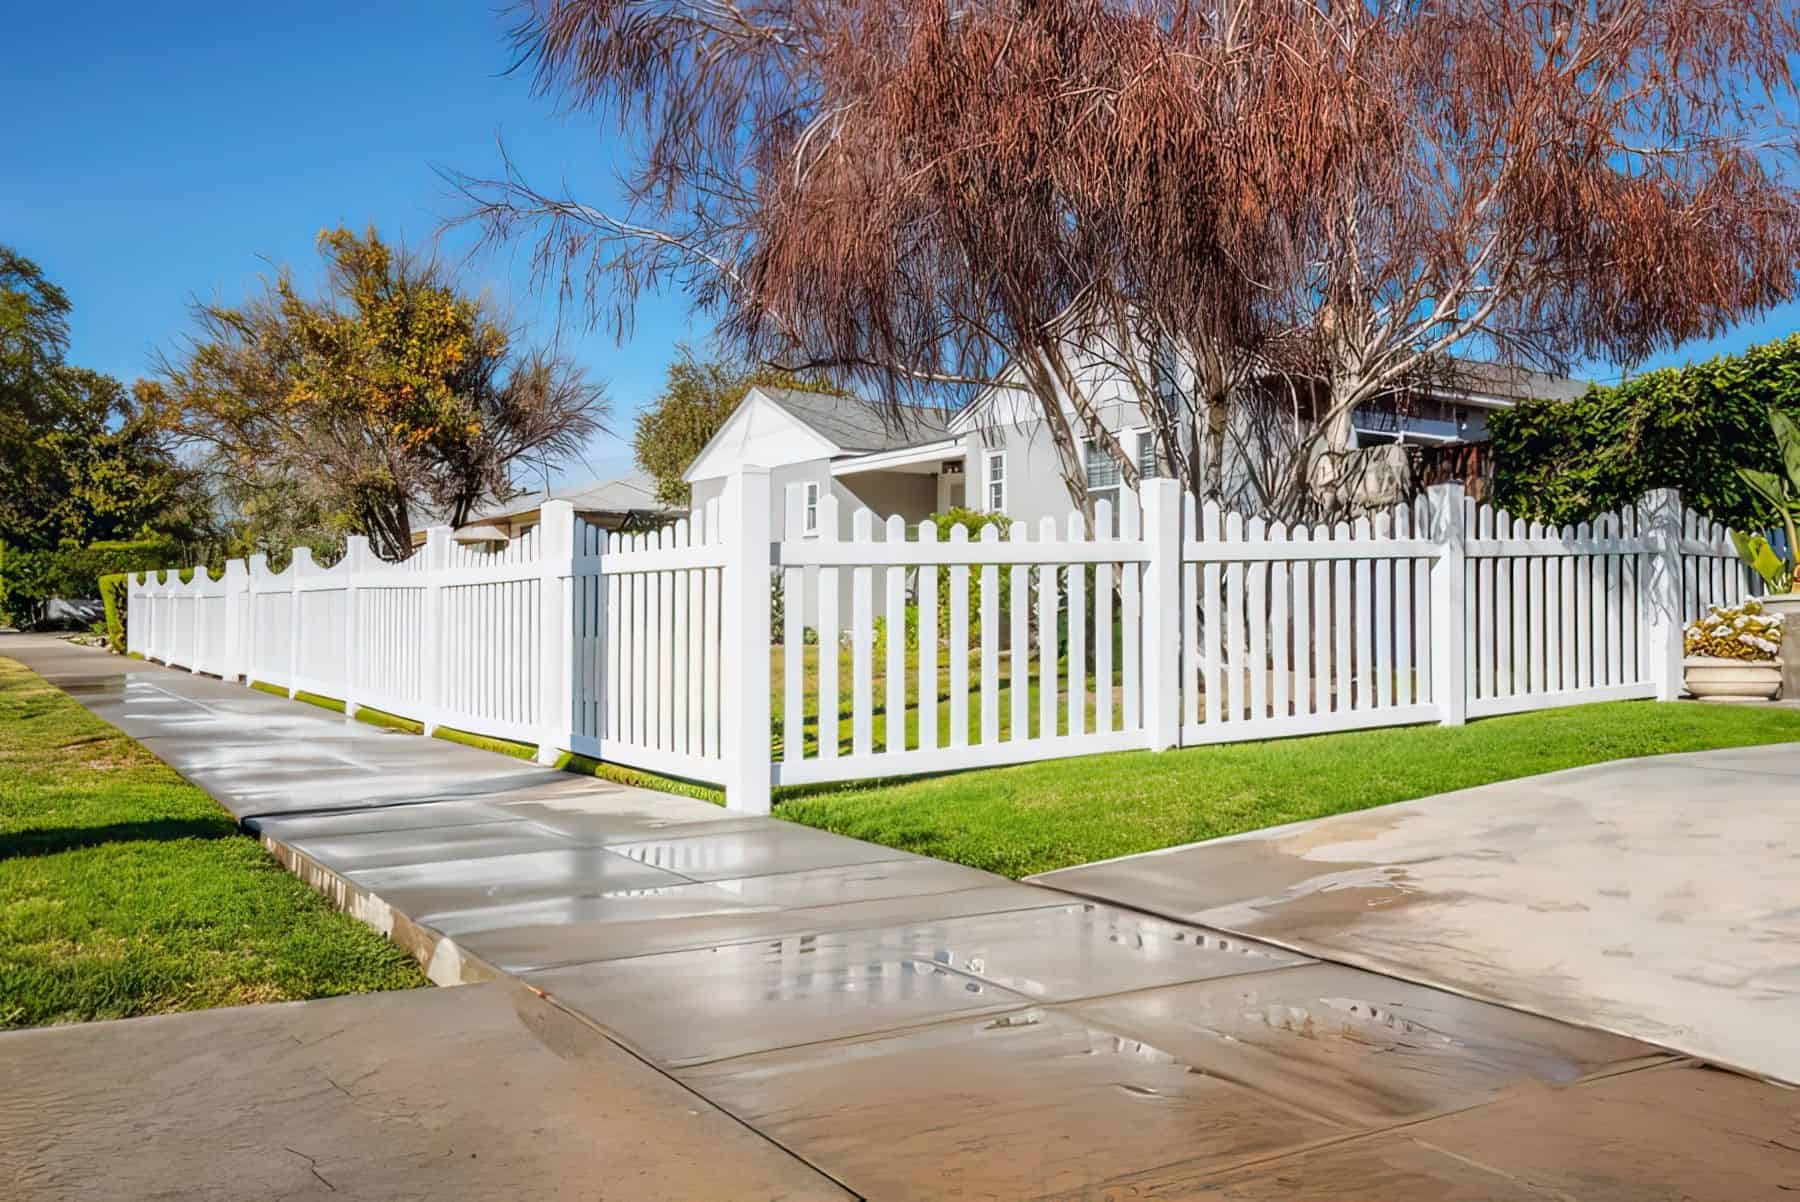 Fully enclosed vinyl scalloped picket fence surrounding a muted white colored home with large trees and a small garden.